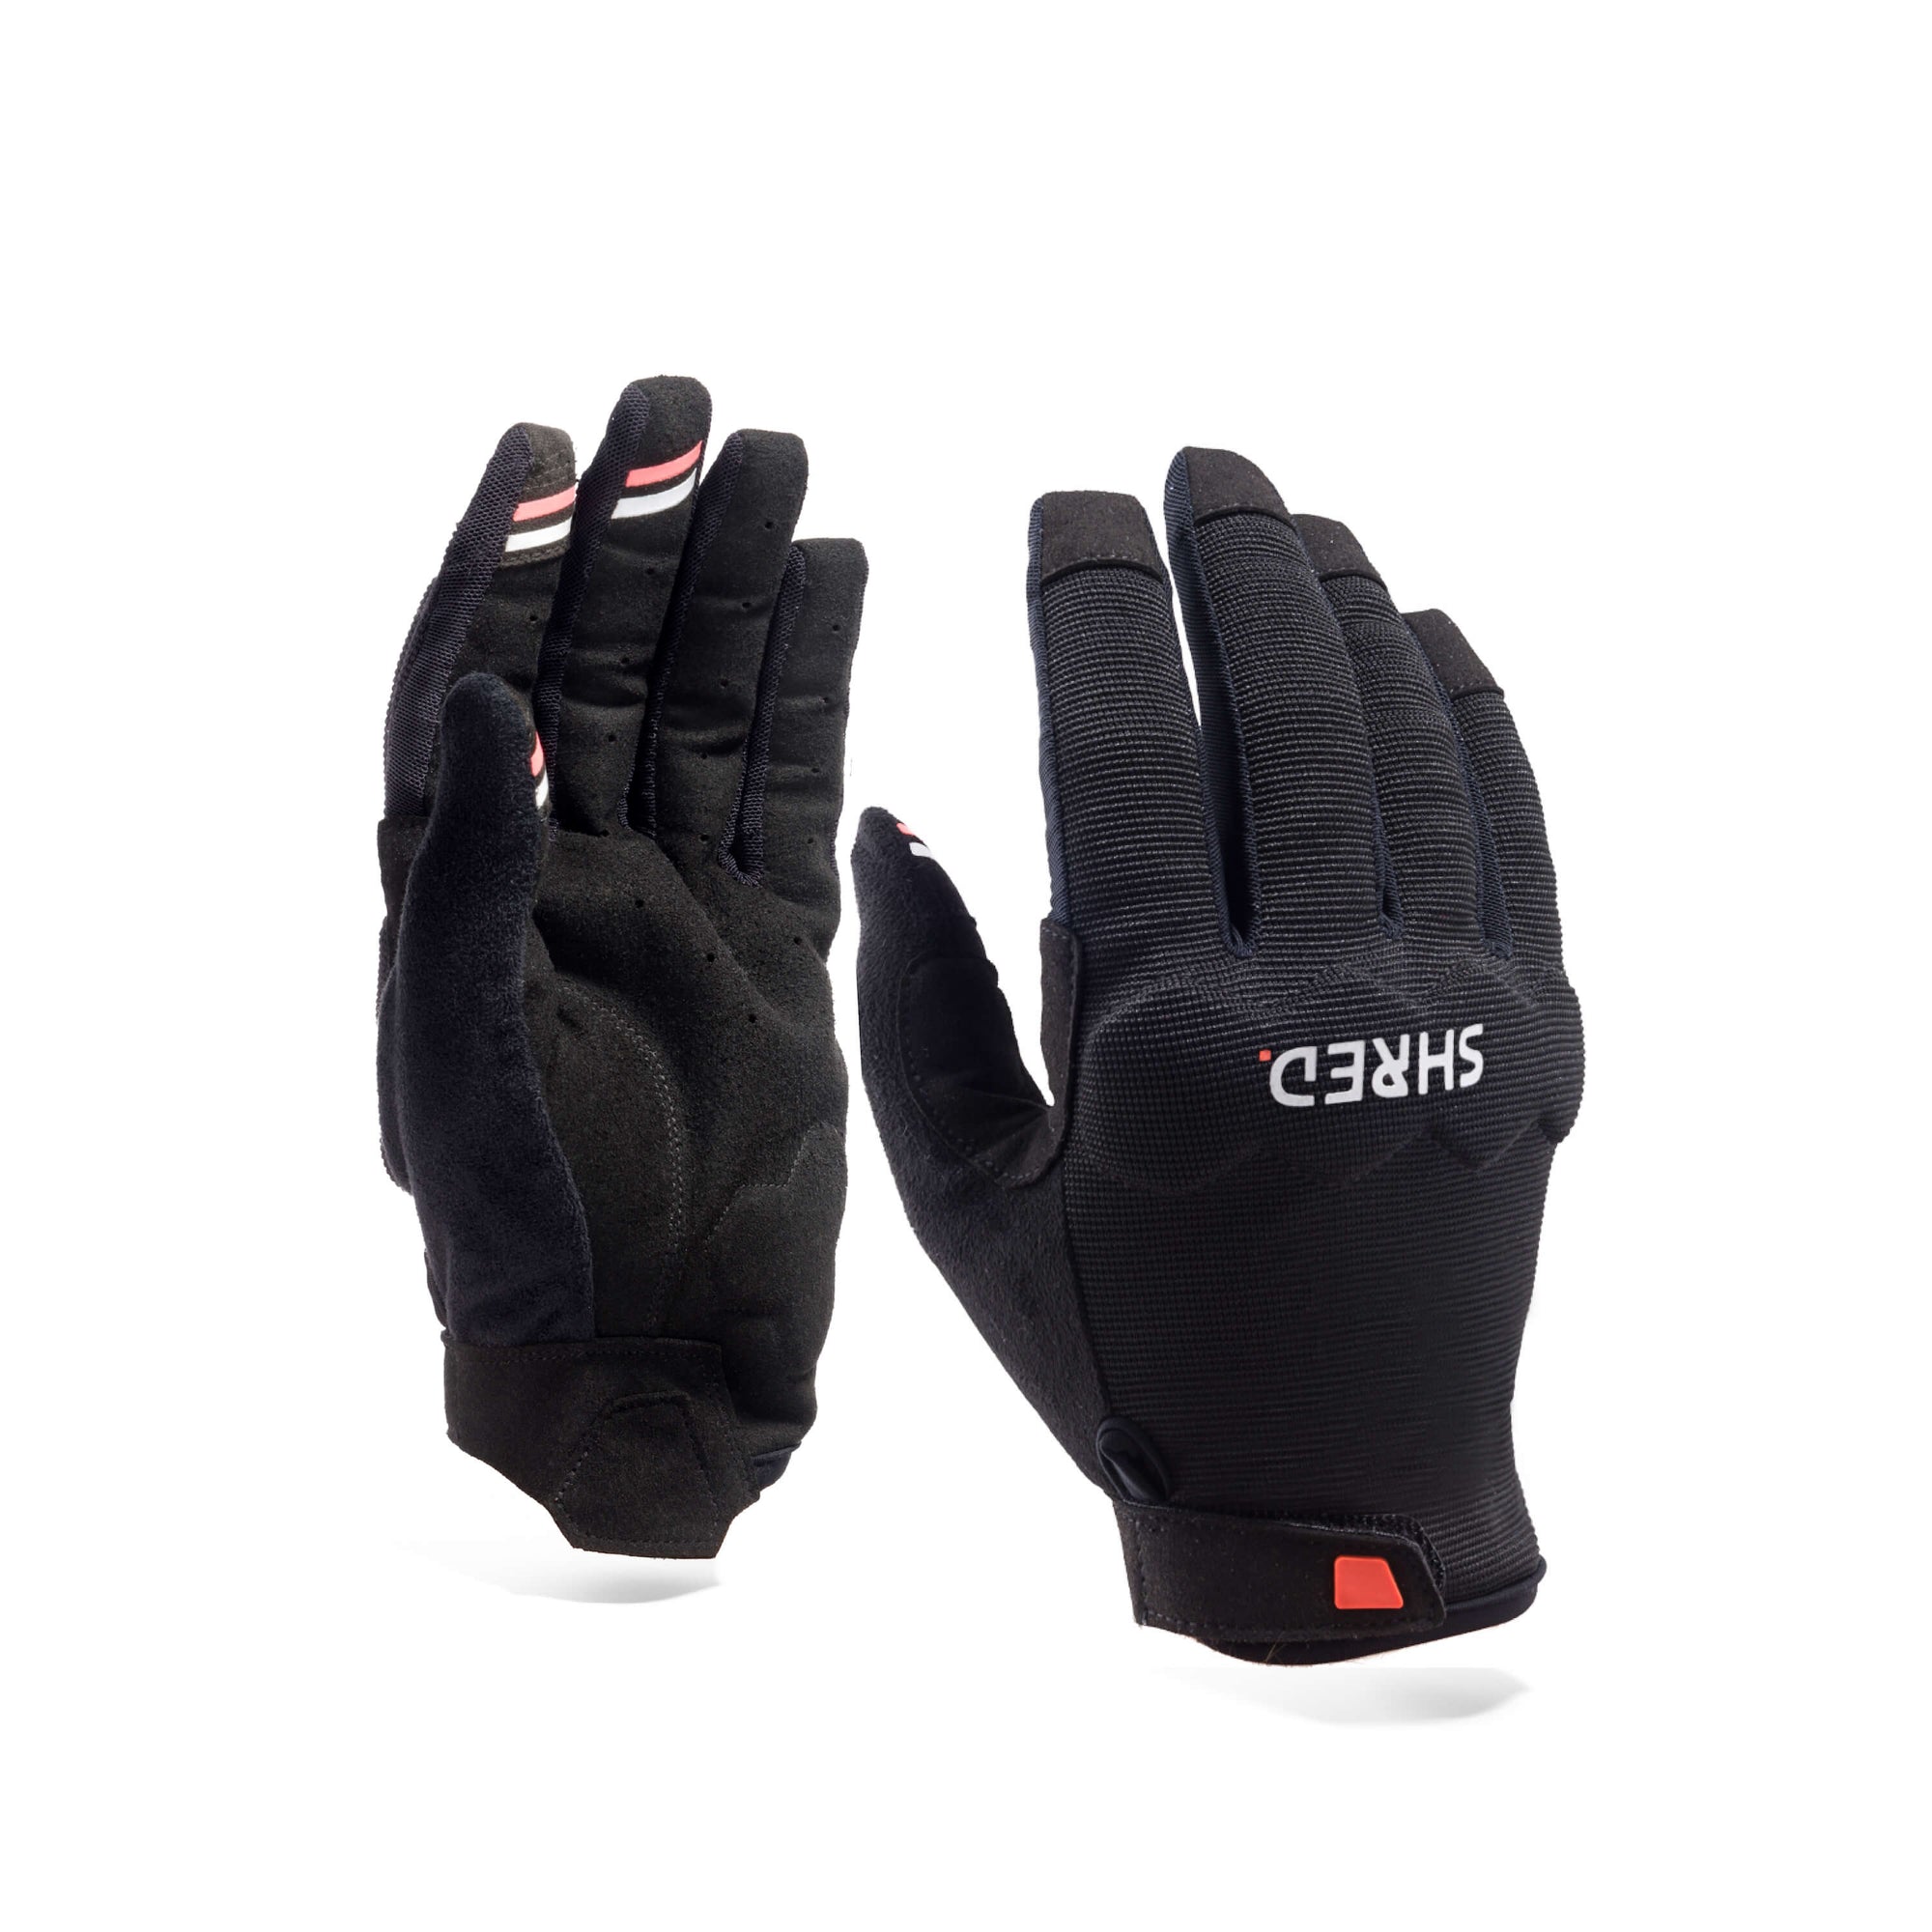 Mtb Protective Gloves Lite - Protective Gloves|BPBGLL11L,BPBGLL11M,BPBGLL11S,BPBGLL11XL,BPBGLL11XS